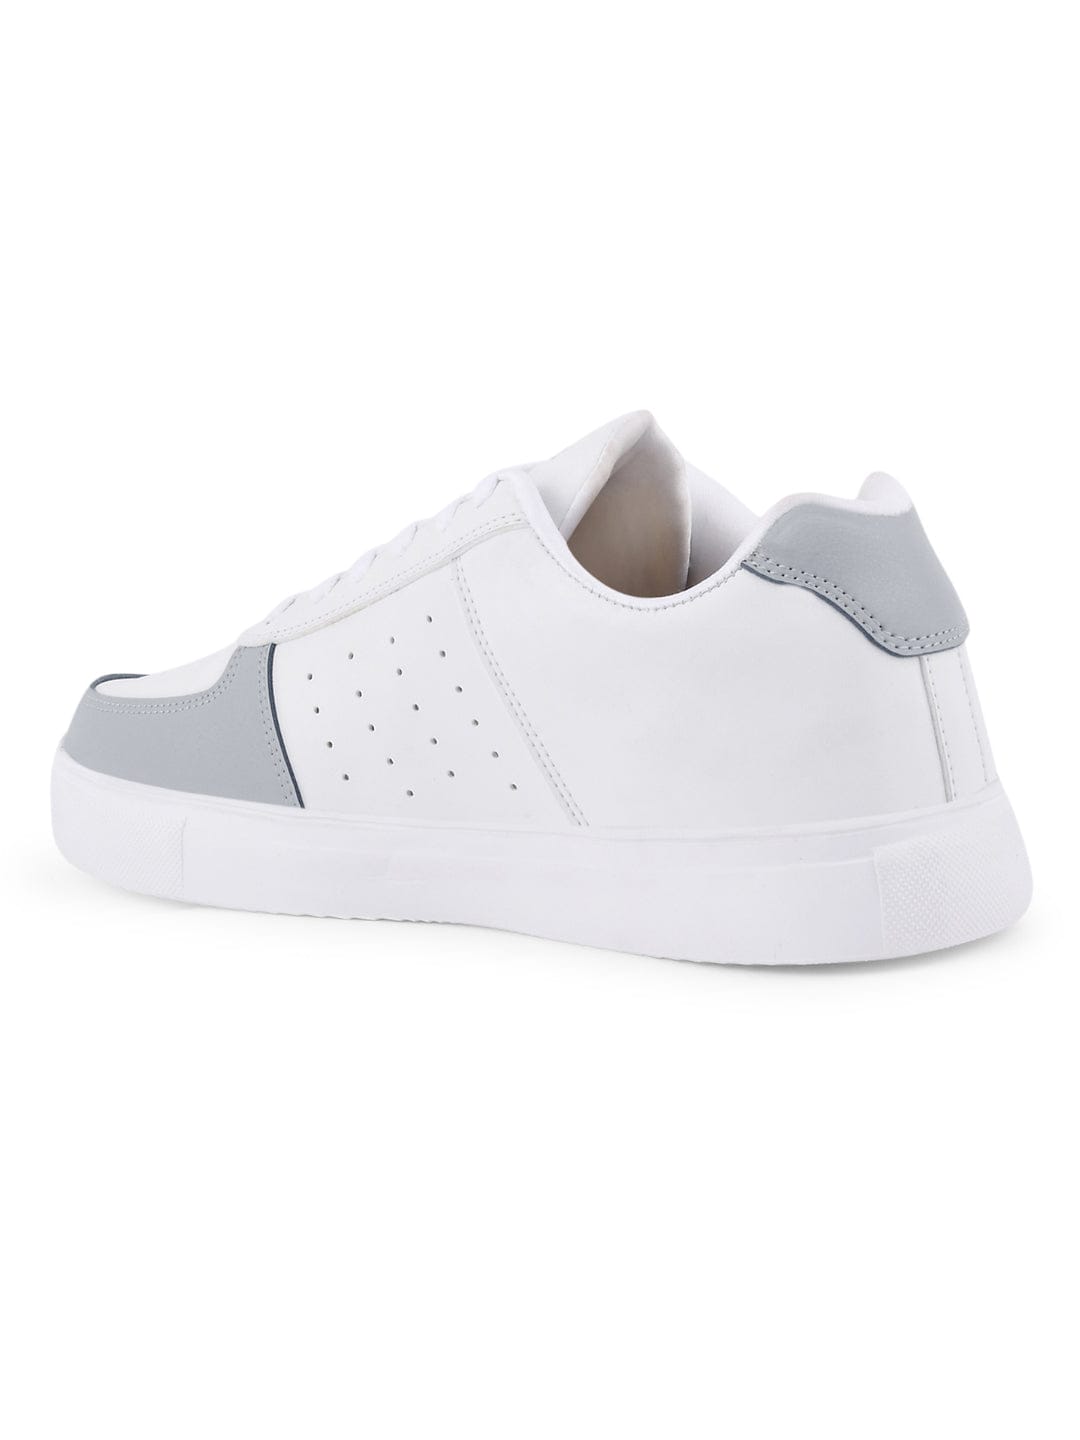 Buy White & Black Sports Shoes for Women by ADORLY Online | Ajio.com